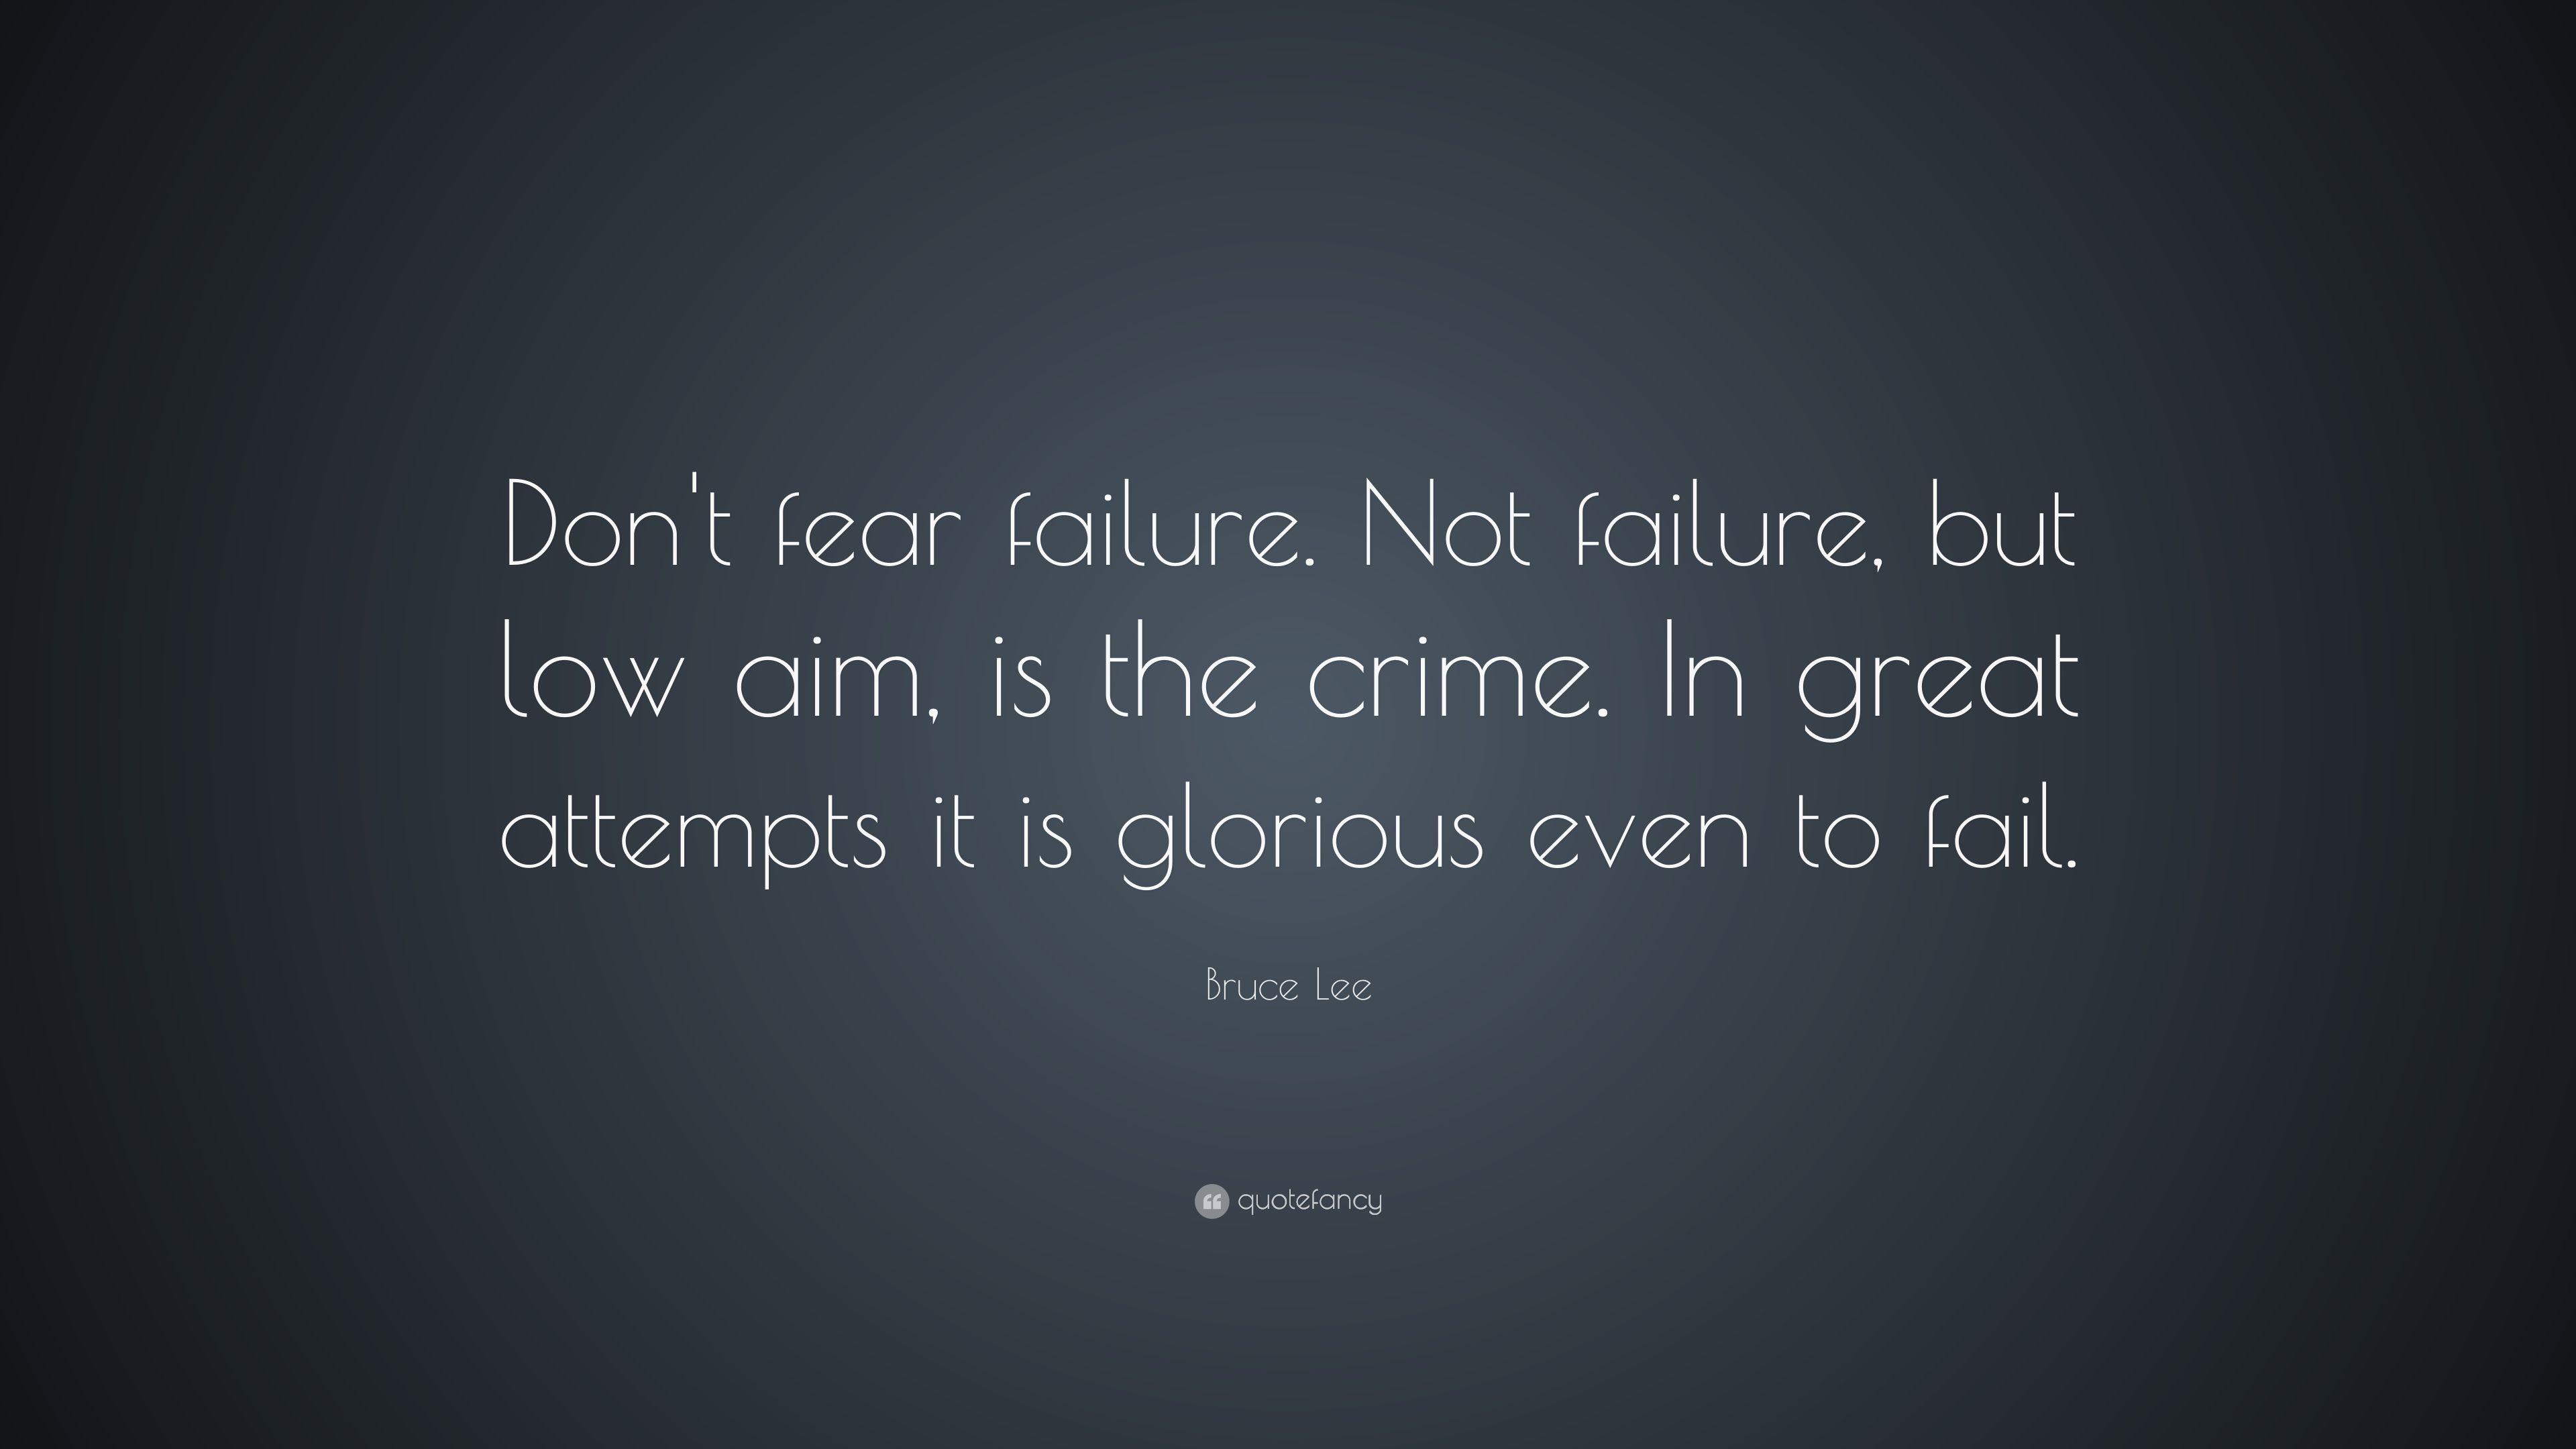 Bruce Lee Quote: “Don't fear failure. Not failure, but low aim, is